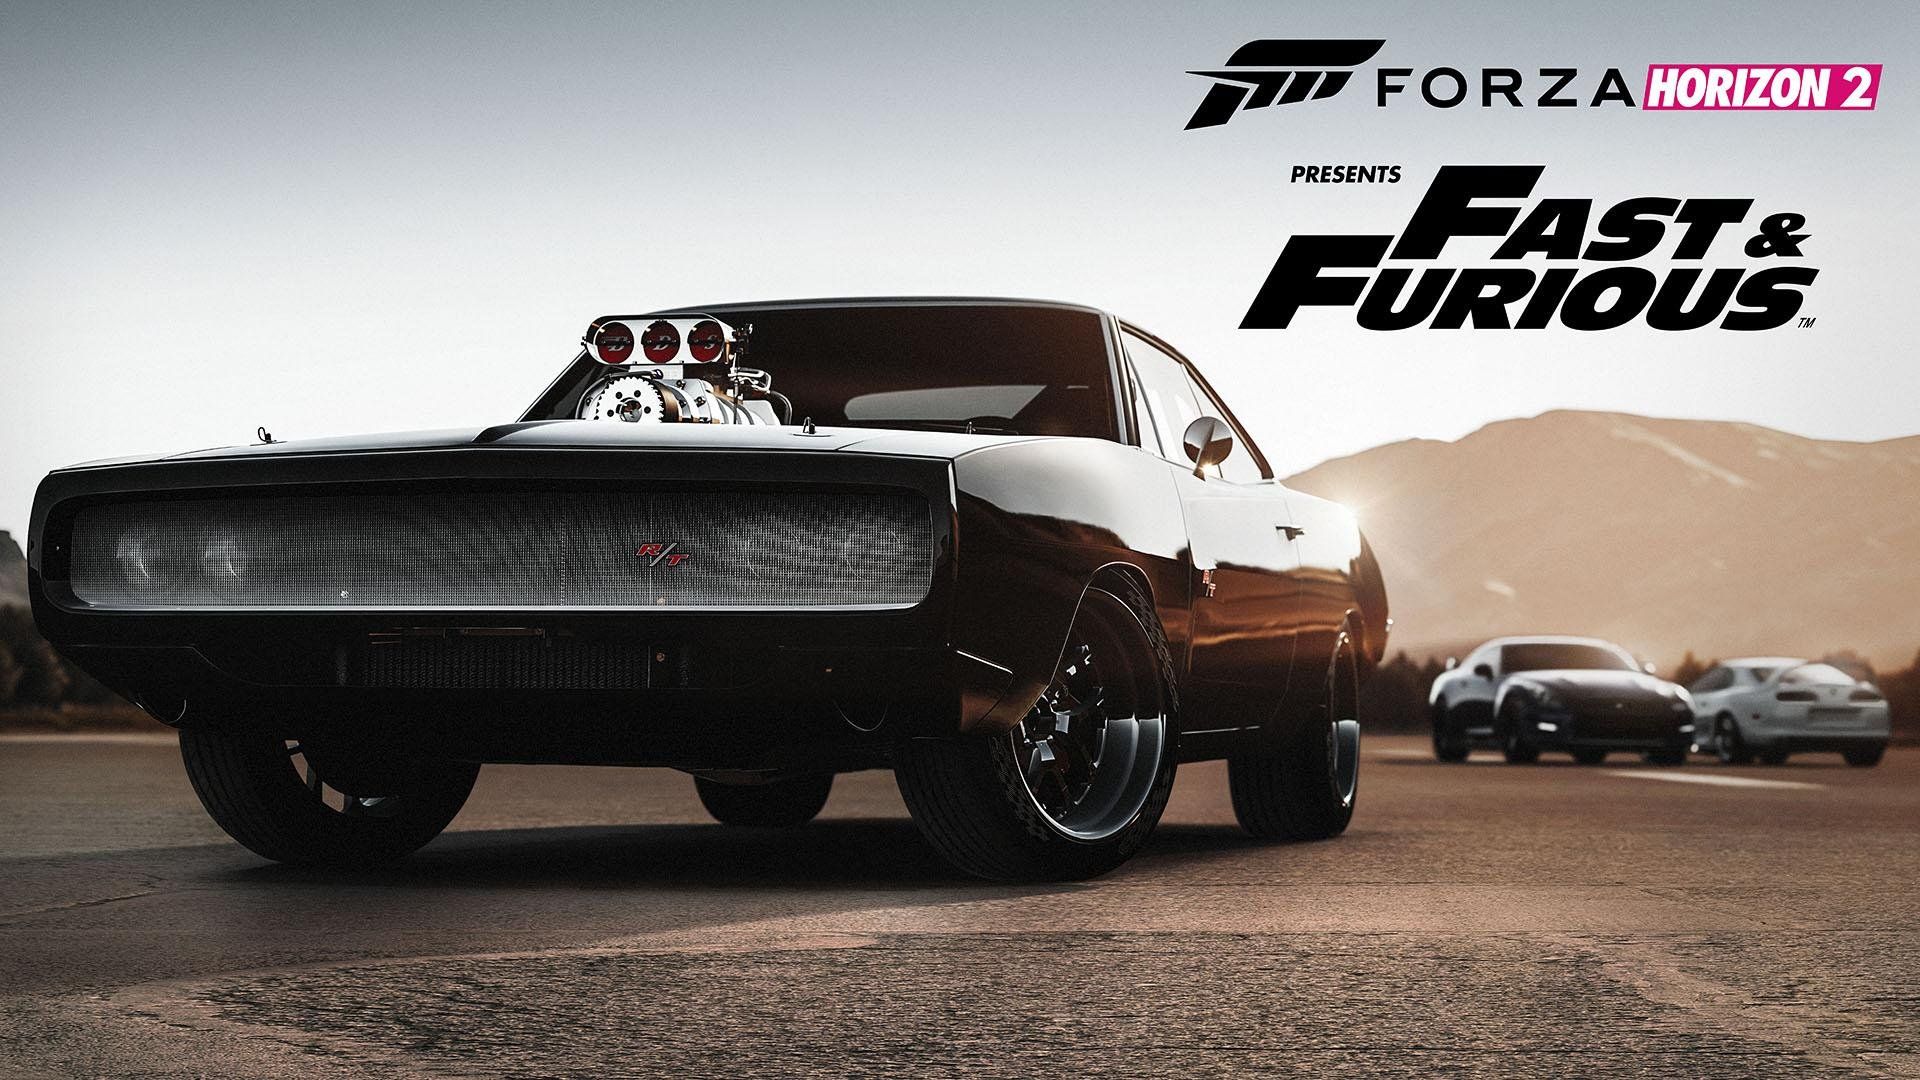 FAST FURIOUS 7 action thriller race racing crime ff7 1ff7 poster ...